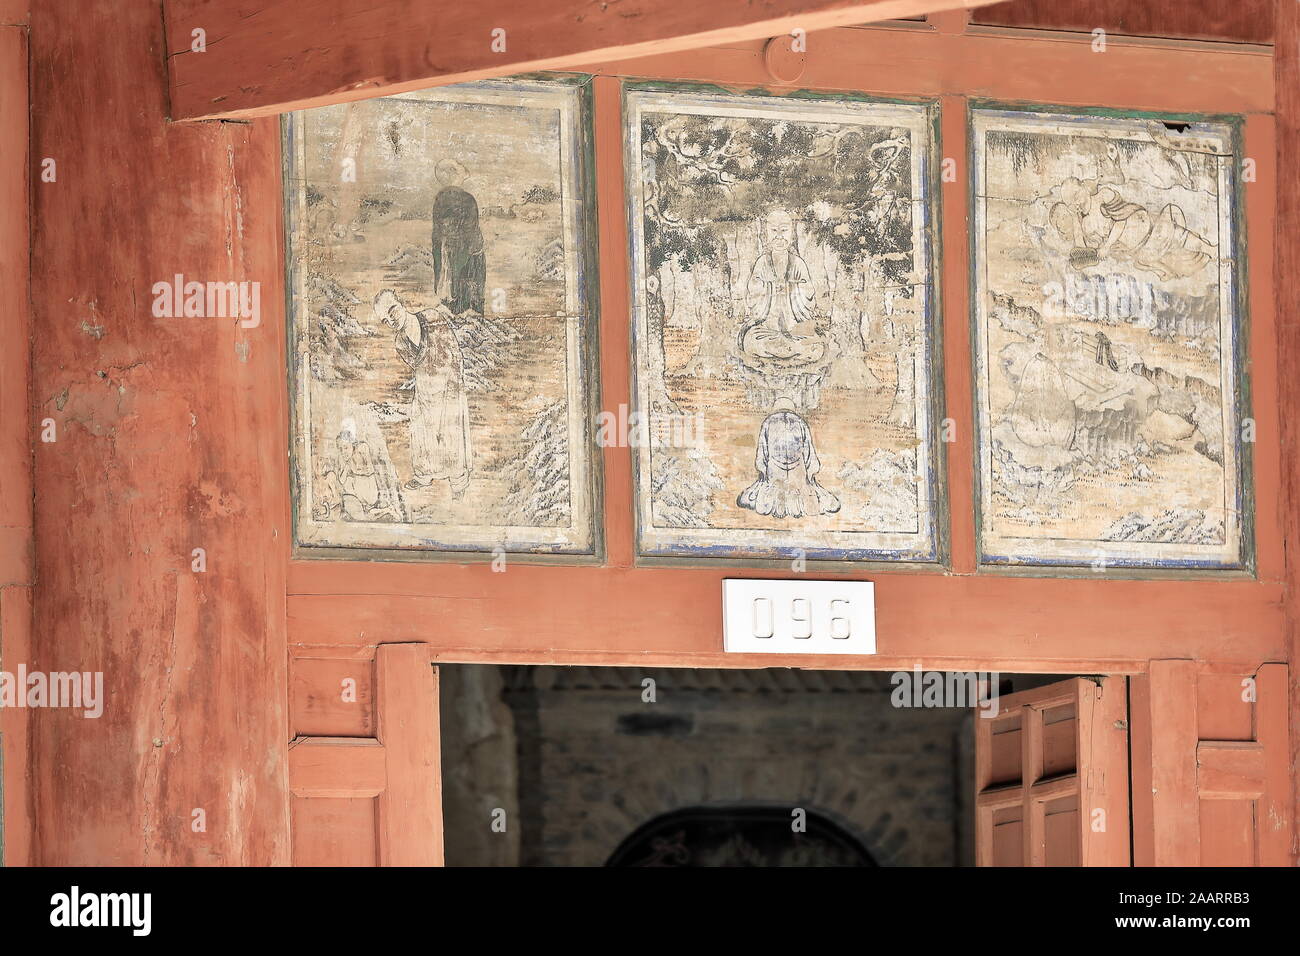 Panels depicting Buddhist scenes-9 storied wooden porch Mogao Cave 96-Dunhuang-Gansu-China-0603 Stock Photo